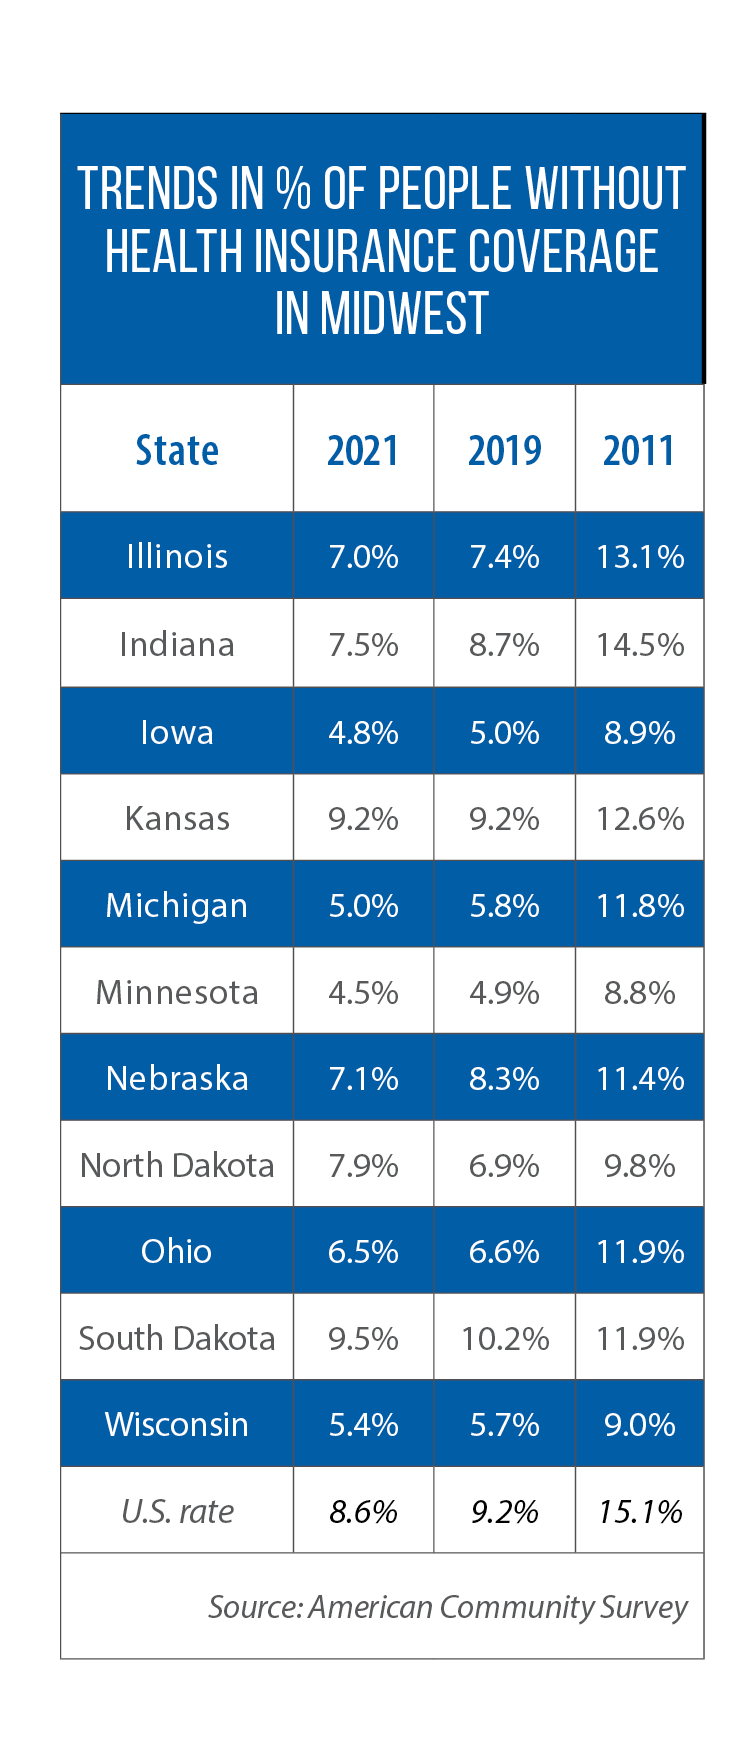 Table of trends in the % of people without health insurance coverage in Midwestern states from 2011 to 2021